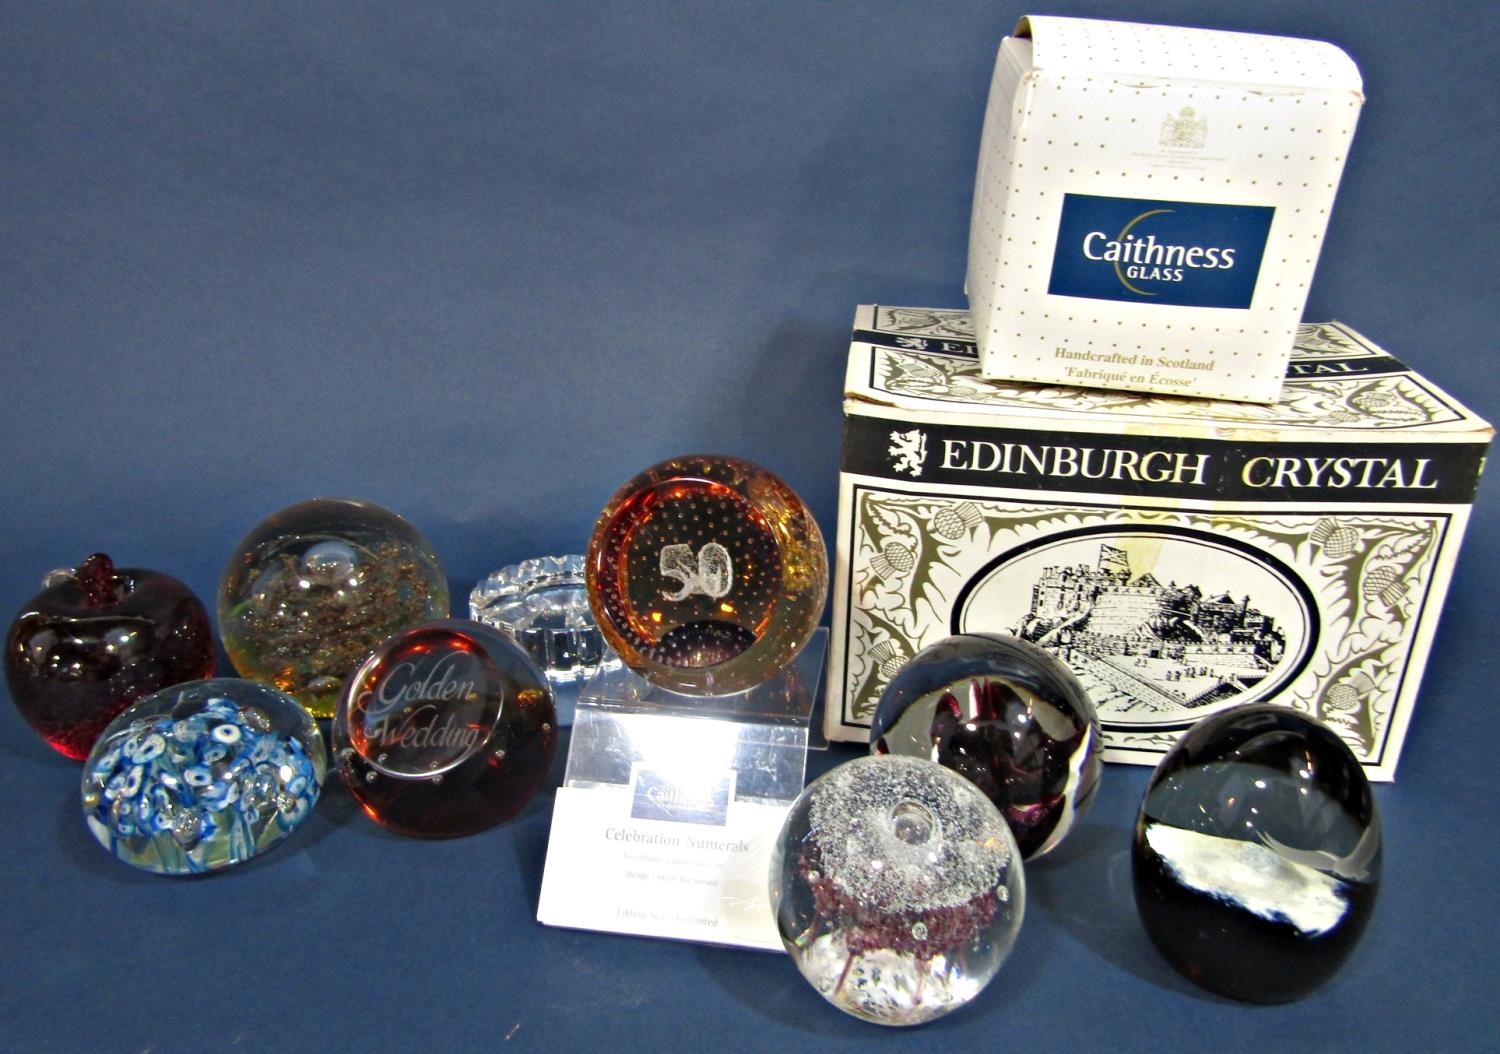 A Caithness Glass Celebration Numerals paperweight designed by Helen Macdonald, and eight further